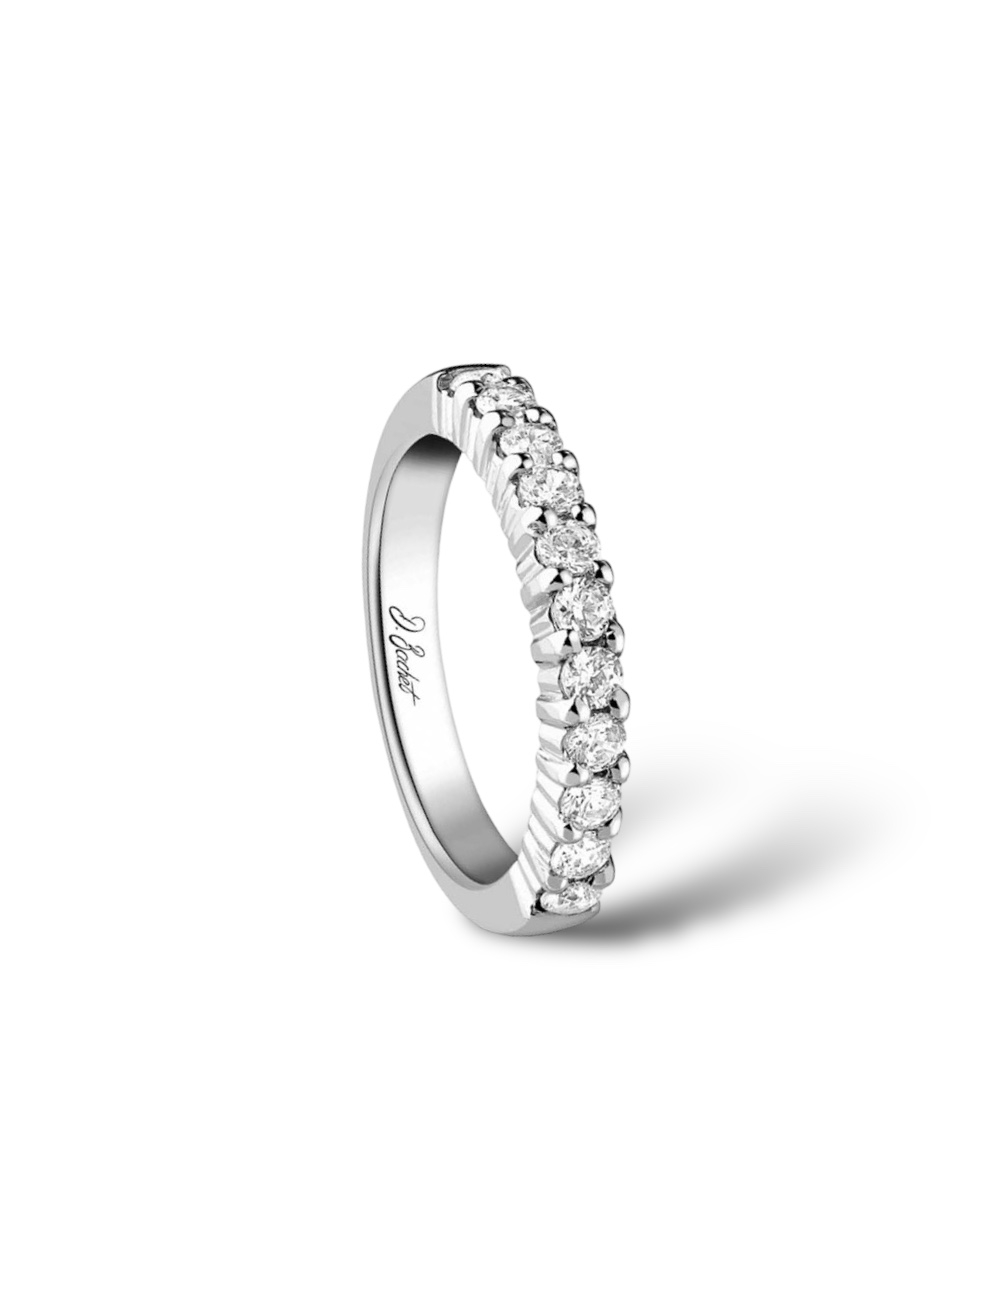 Diamond claw band, 0.55ct FVS, platinum/gold, handmade in France, timeless elegance by D.Bachet.